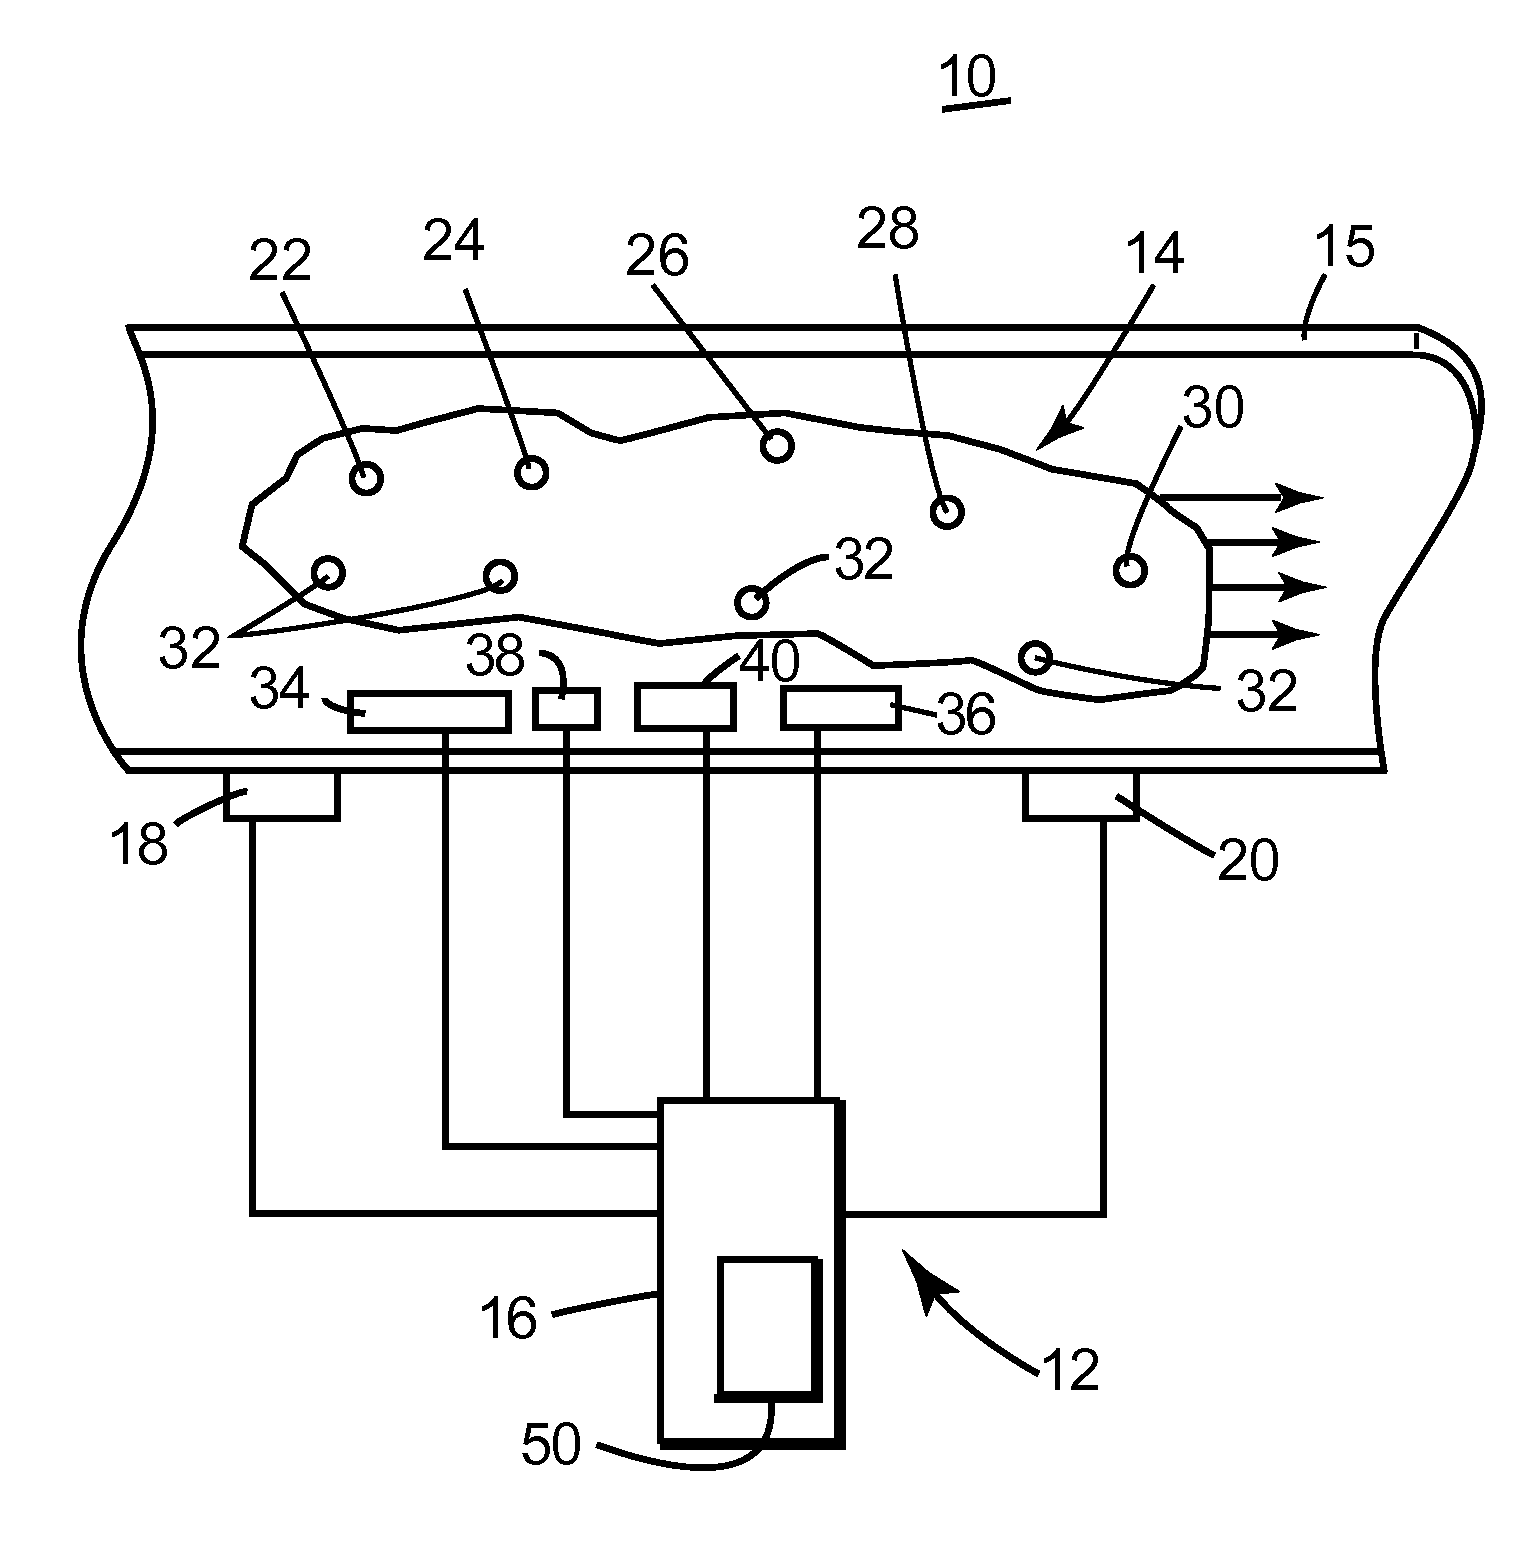 Gas analysis system and method